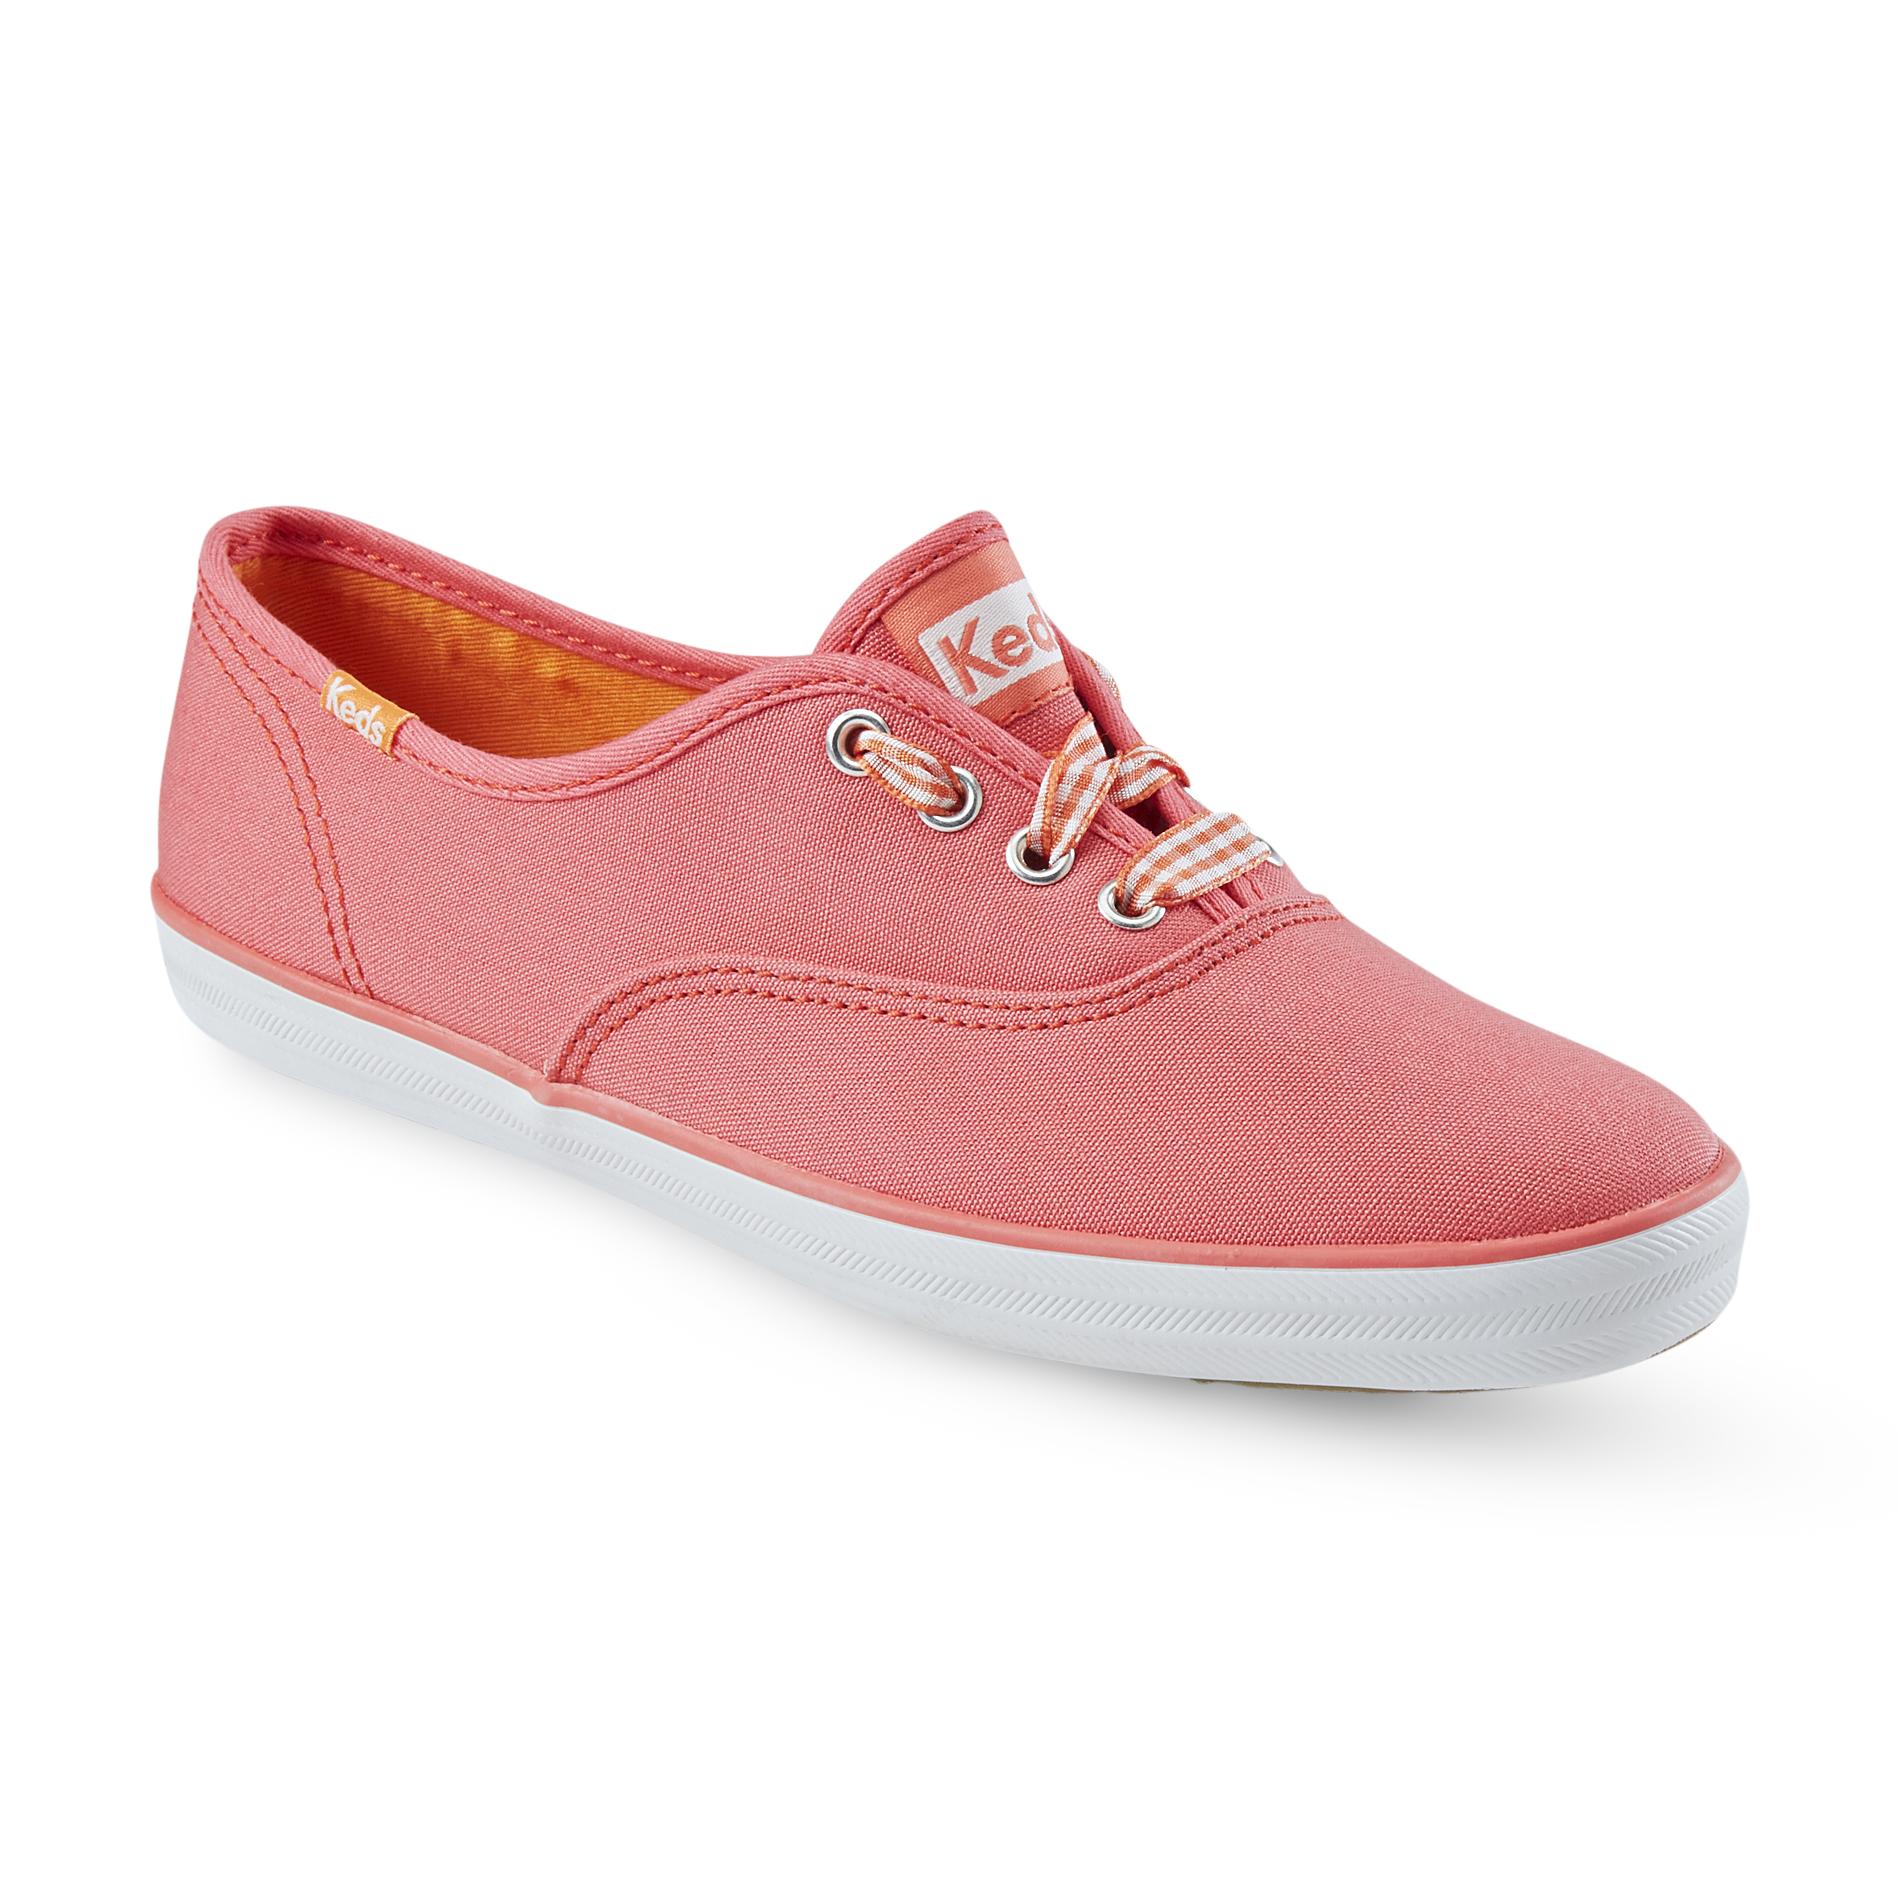 Women's Athletic Casual Shoe Classic Royal Glide: Essentials at Sears